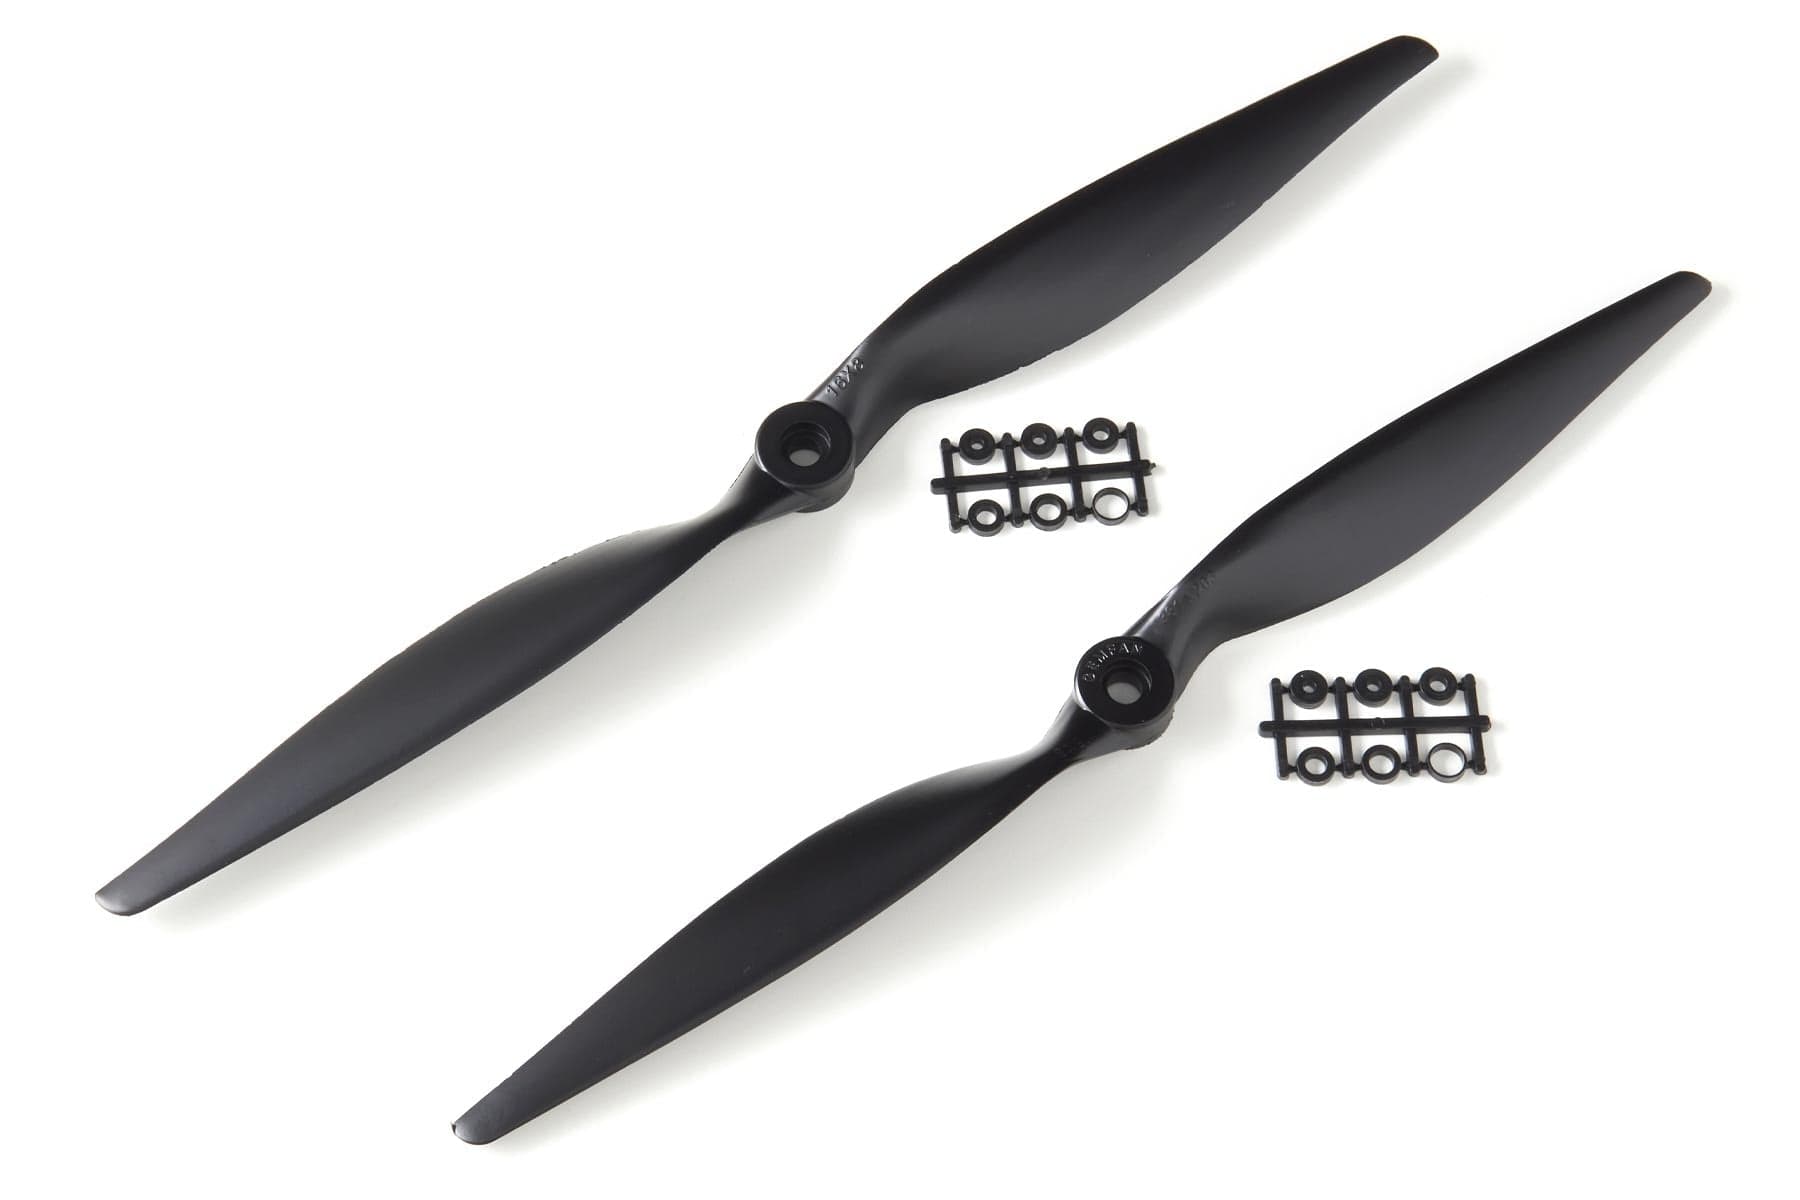 Skynetic 1750mm Bison XT STOL 15x8 and 16x8 2-Blade Propellers (2 Pack) SKY5000-016